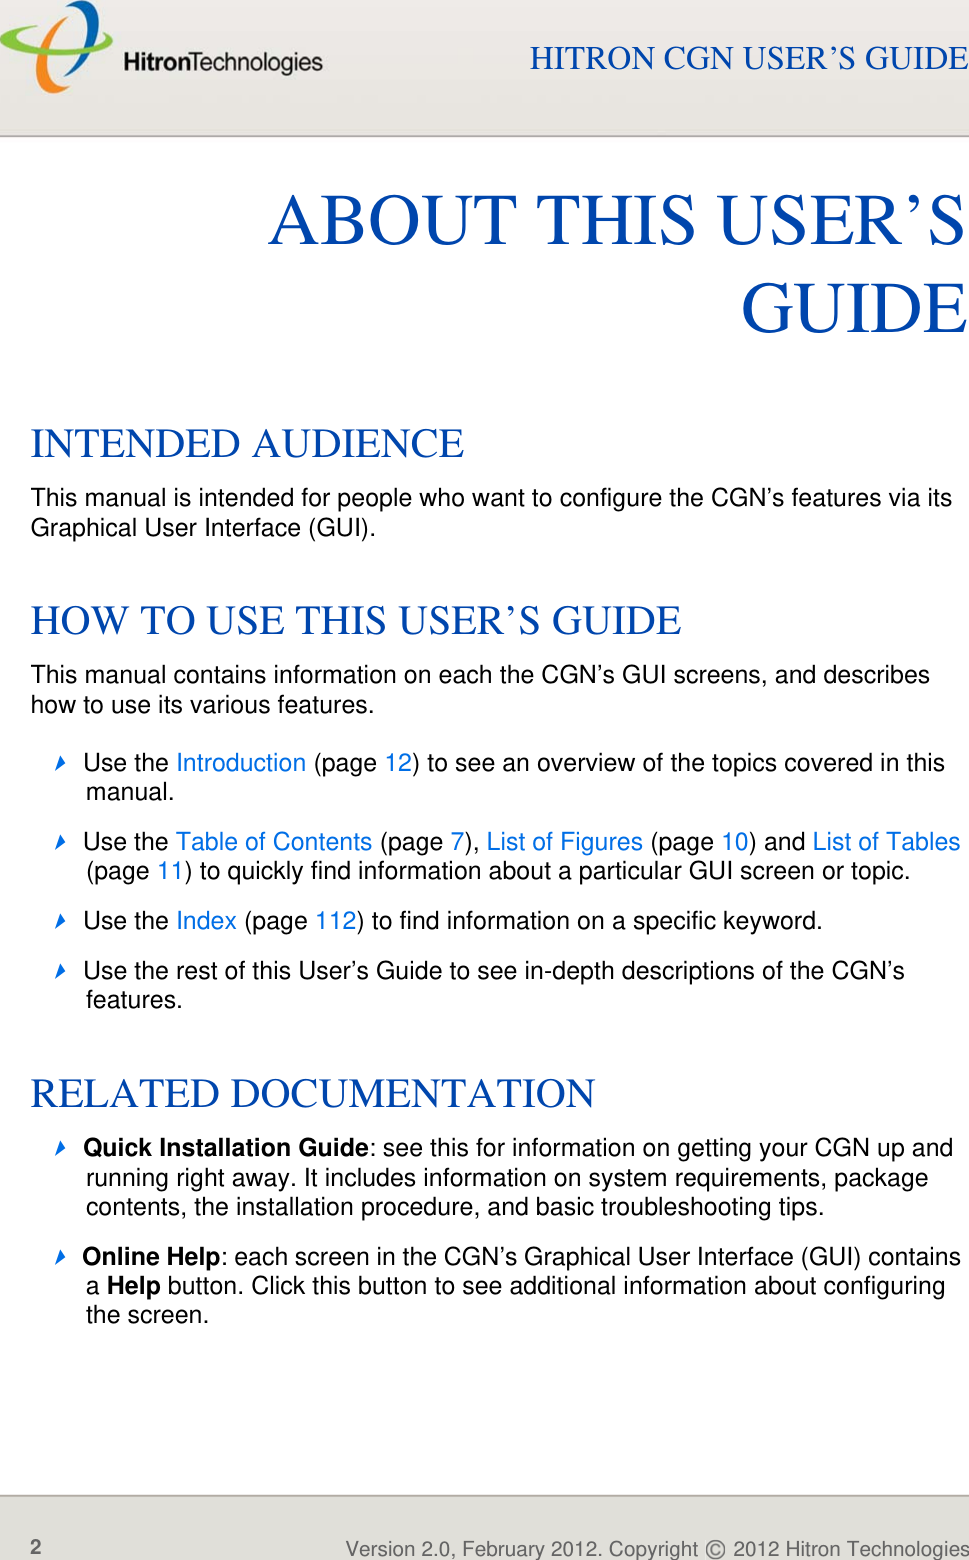 ABOUT THIS USER’S GUIDEVersion 2.0, February 2012. Copyright   2012 Hitron Technologies2HITRON CGN USER’S GUIDEABOUT THIS USER’SGUIDEINTENDED AUDIENCEThis manual is intended for people who want to configure the CGN’s features via its Graphical User Interface (GUI). HOW TO USE THIS USER’S GUIDEThis manual contains information on each the CGN’s GUI screens, and describes how to use its various features.Use the Introduction (page 12) to see an overview of the topics covered in this manual.Use the Table of Contents (page 7), List of Figures (page 10) and List of Tables (page 11) to quickly find information about a particular GUI screen or topic.Use the Index (page 112) to find information on a specific keyword.Use the rest of this User’s Guide to see in-depth descriptions of the CGN’s features.RELATED DOCUMENTATIONQuick Installation Guide: see this for information on getting your CGN up and running right away. It includes information on system requirements, package contents, the installation procedure, and basic troubleshooting tips.Online Help: each screen in the CGN’s Graphical User Interface (GUI) contains a Help button. Click this button to see additional information about configuring the screen.